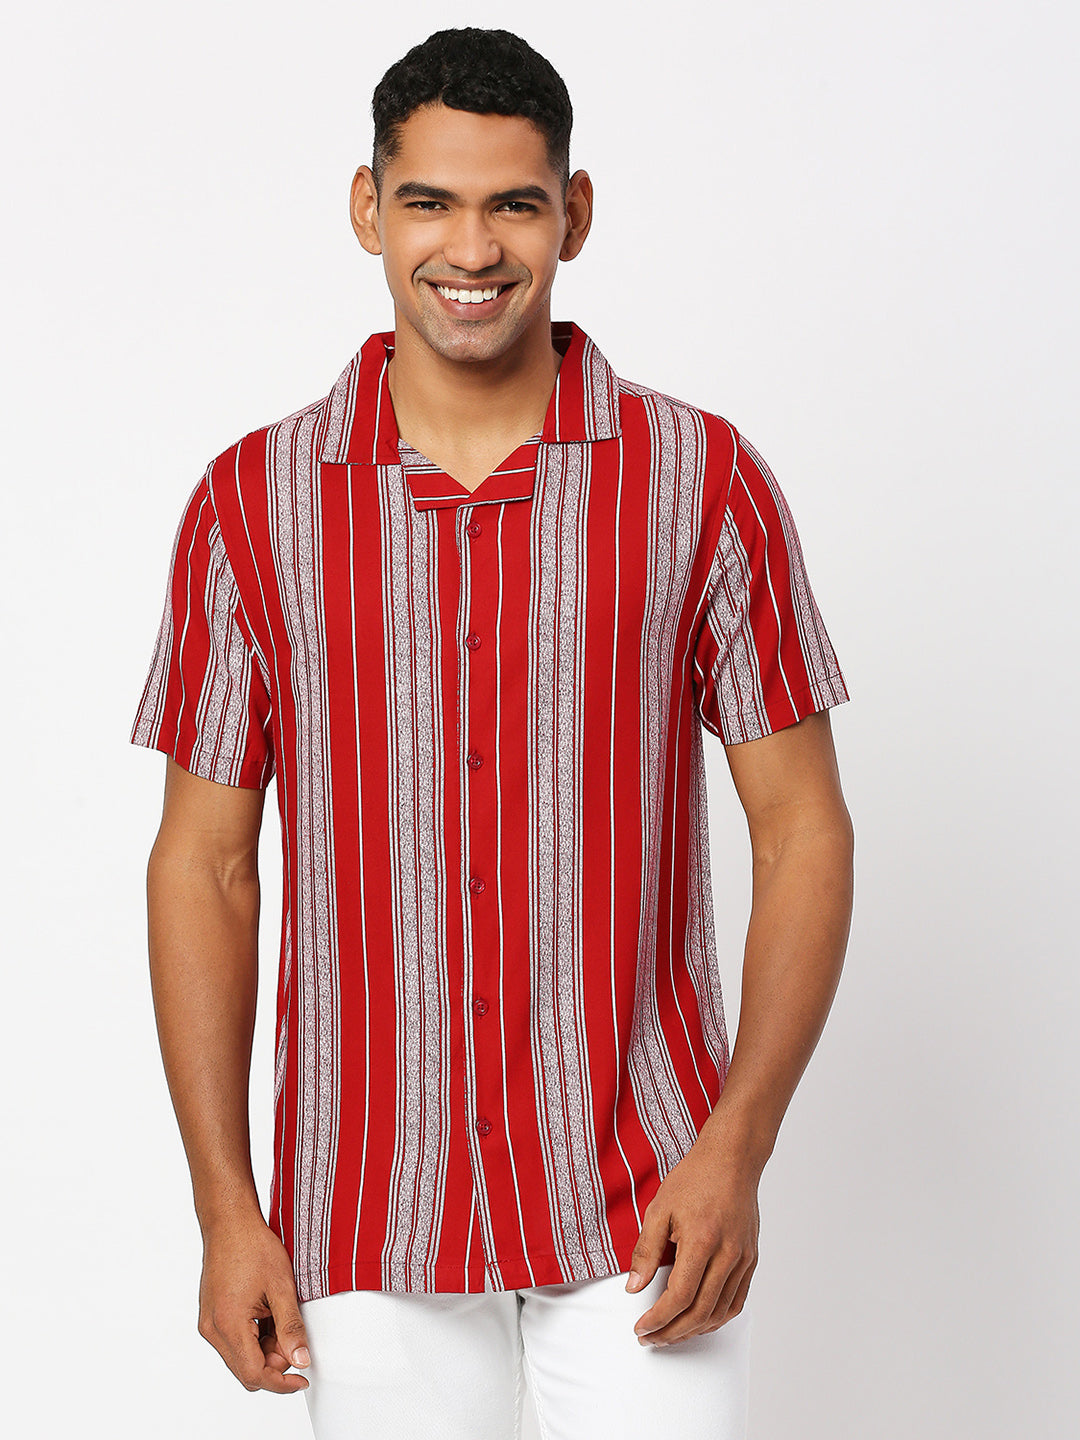 Sincerity Stripes Red Shirt